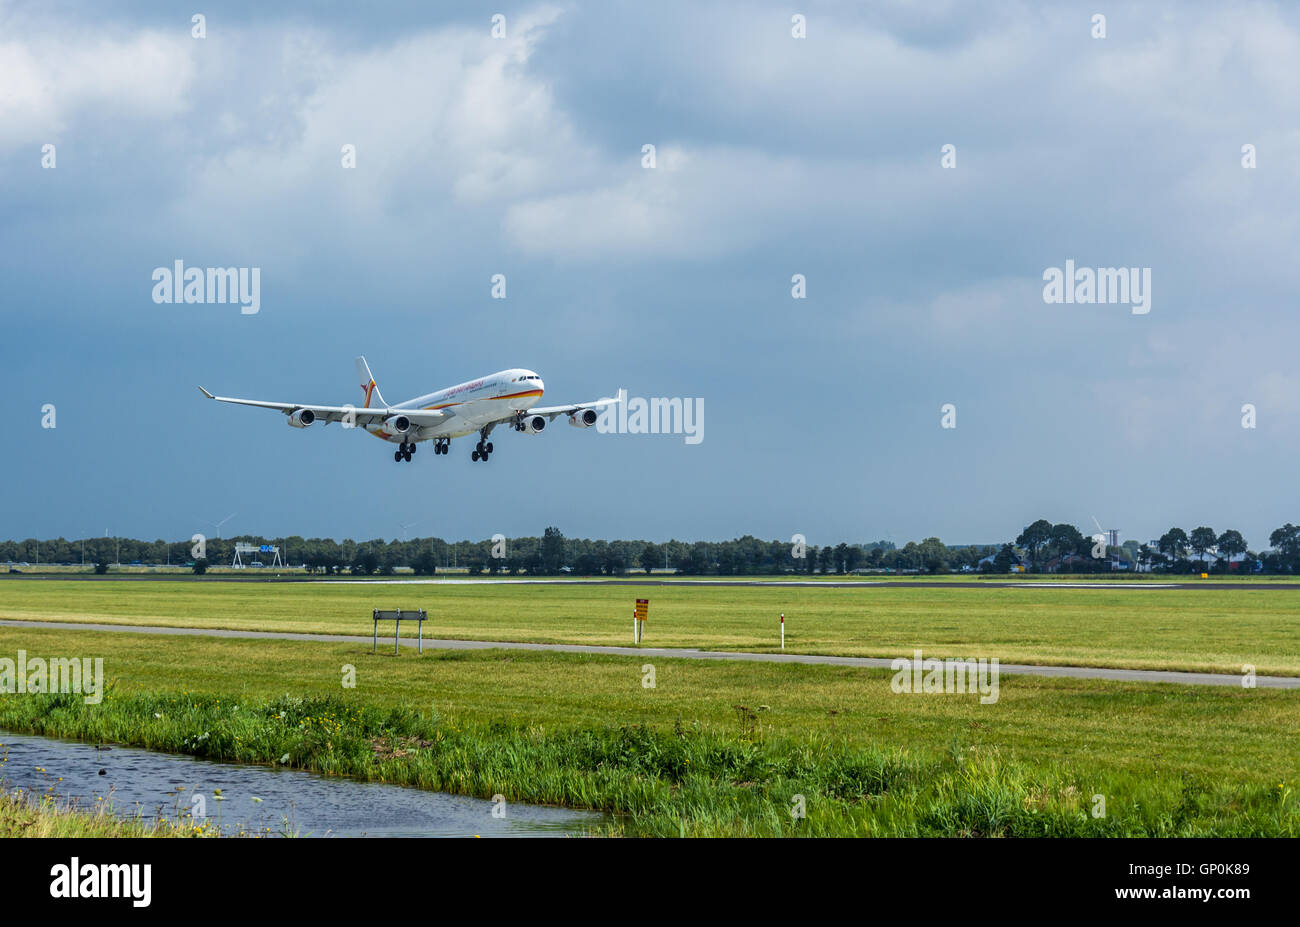 Schiphol Airport, the Netherlands - August 20, 2016: Surinam Airways Airbus A340-300 landing at Amsterdam Schiphol Airport Stock Photo